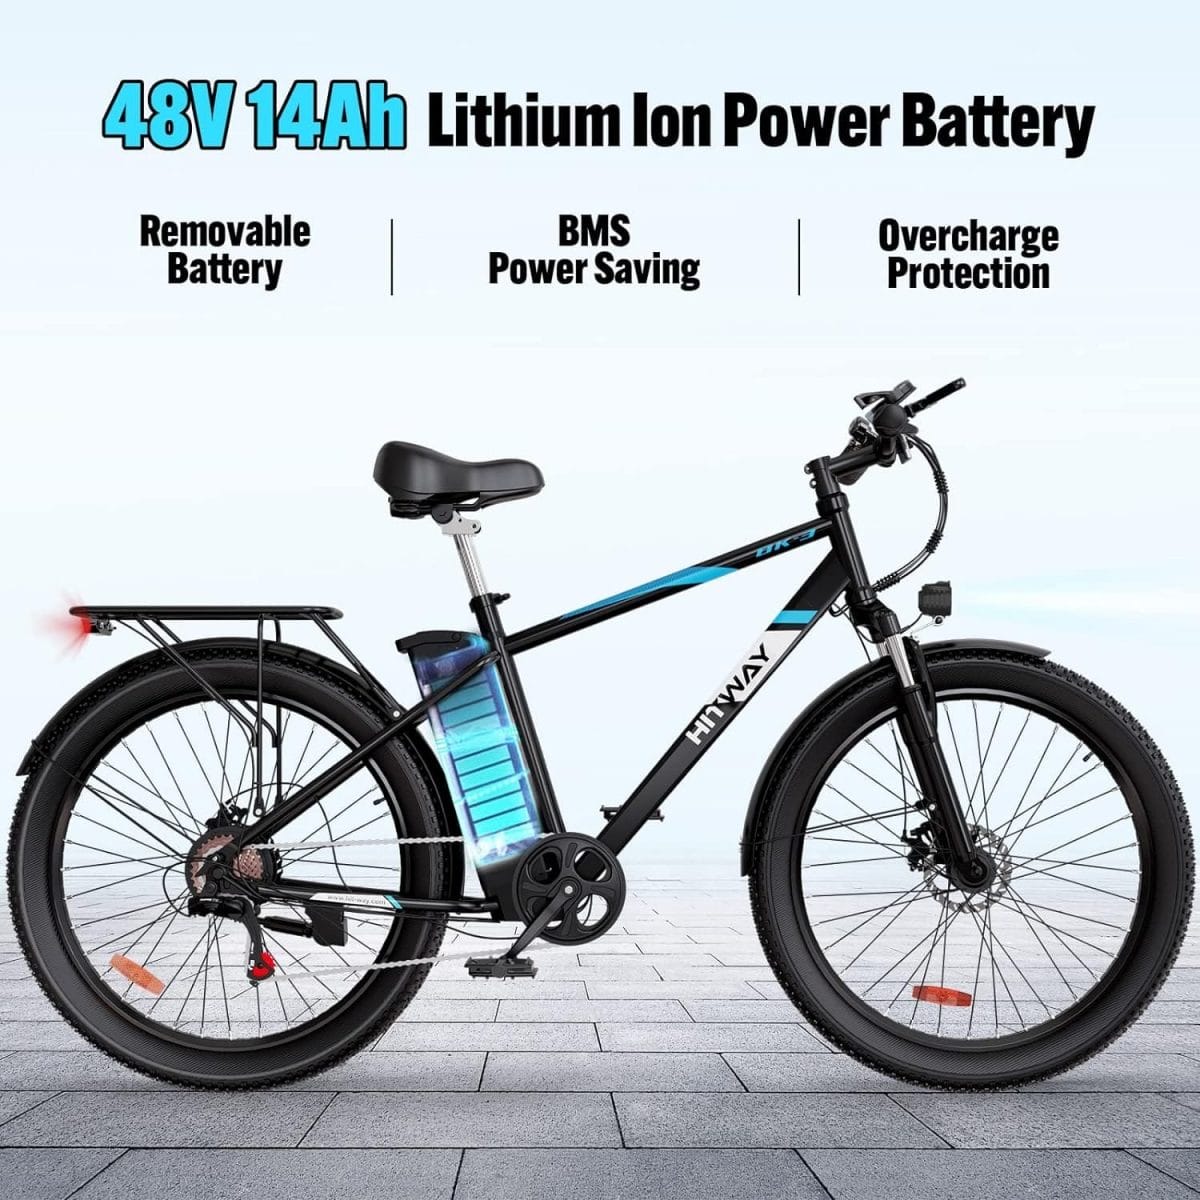 HITWAY Electric Bike for Adults, 750W/48V/14Ah Ebike with Removable Battery, 20MPH/35-75Miles Electric Bicycle with 26×3.0 Fat Tire, Mountain E Bike for Men Women, 7-Speed Transmission, IP54